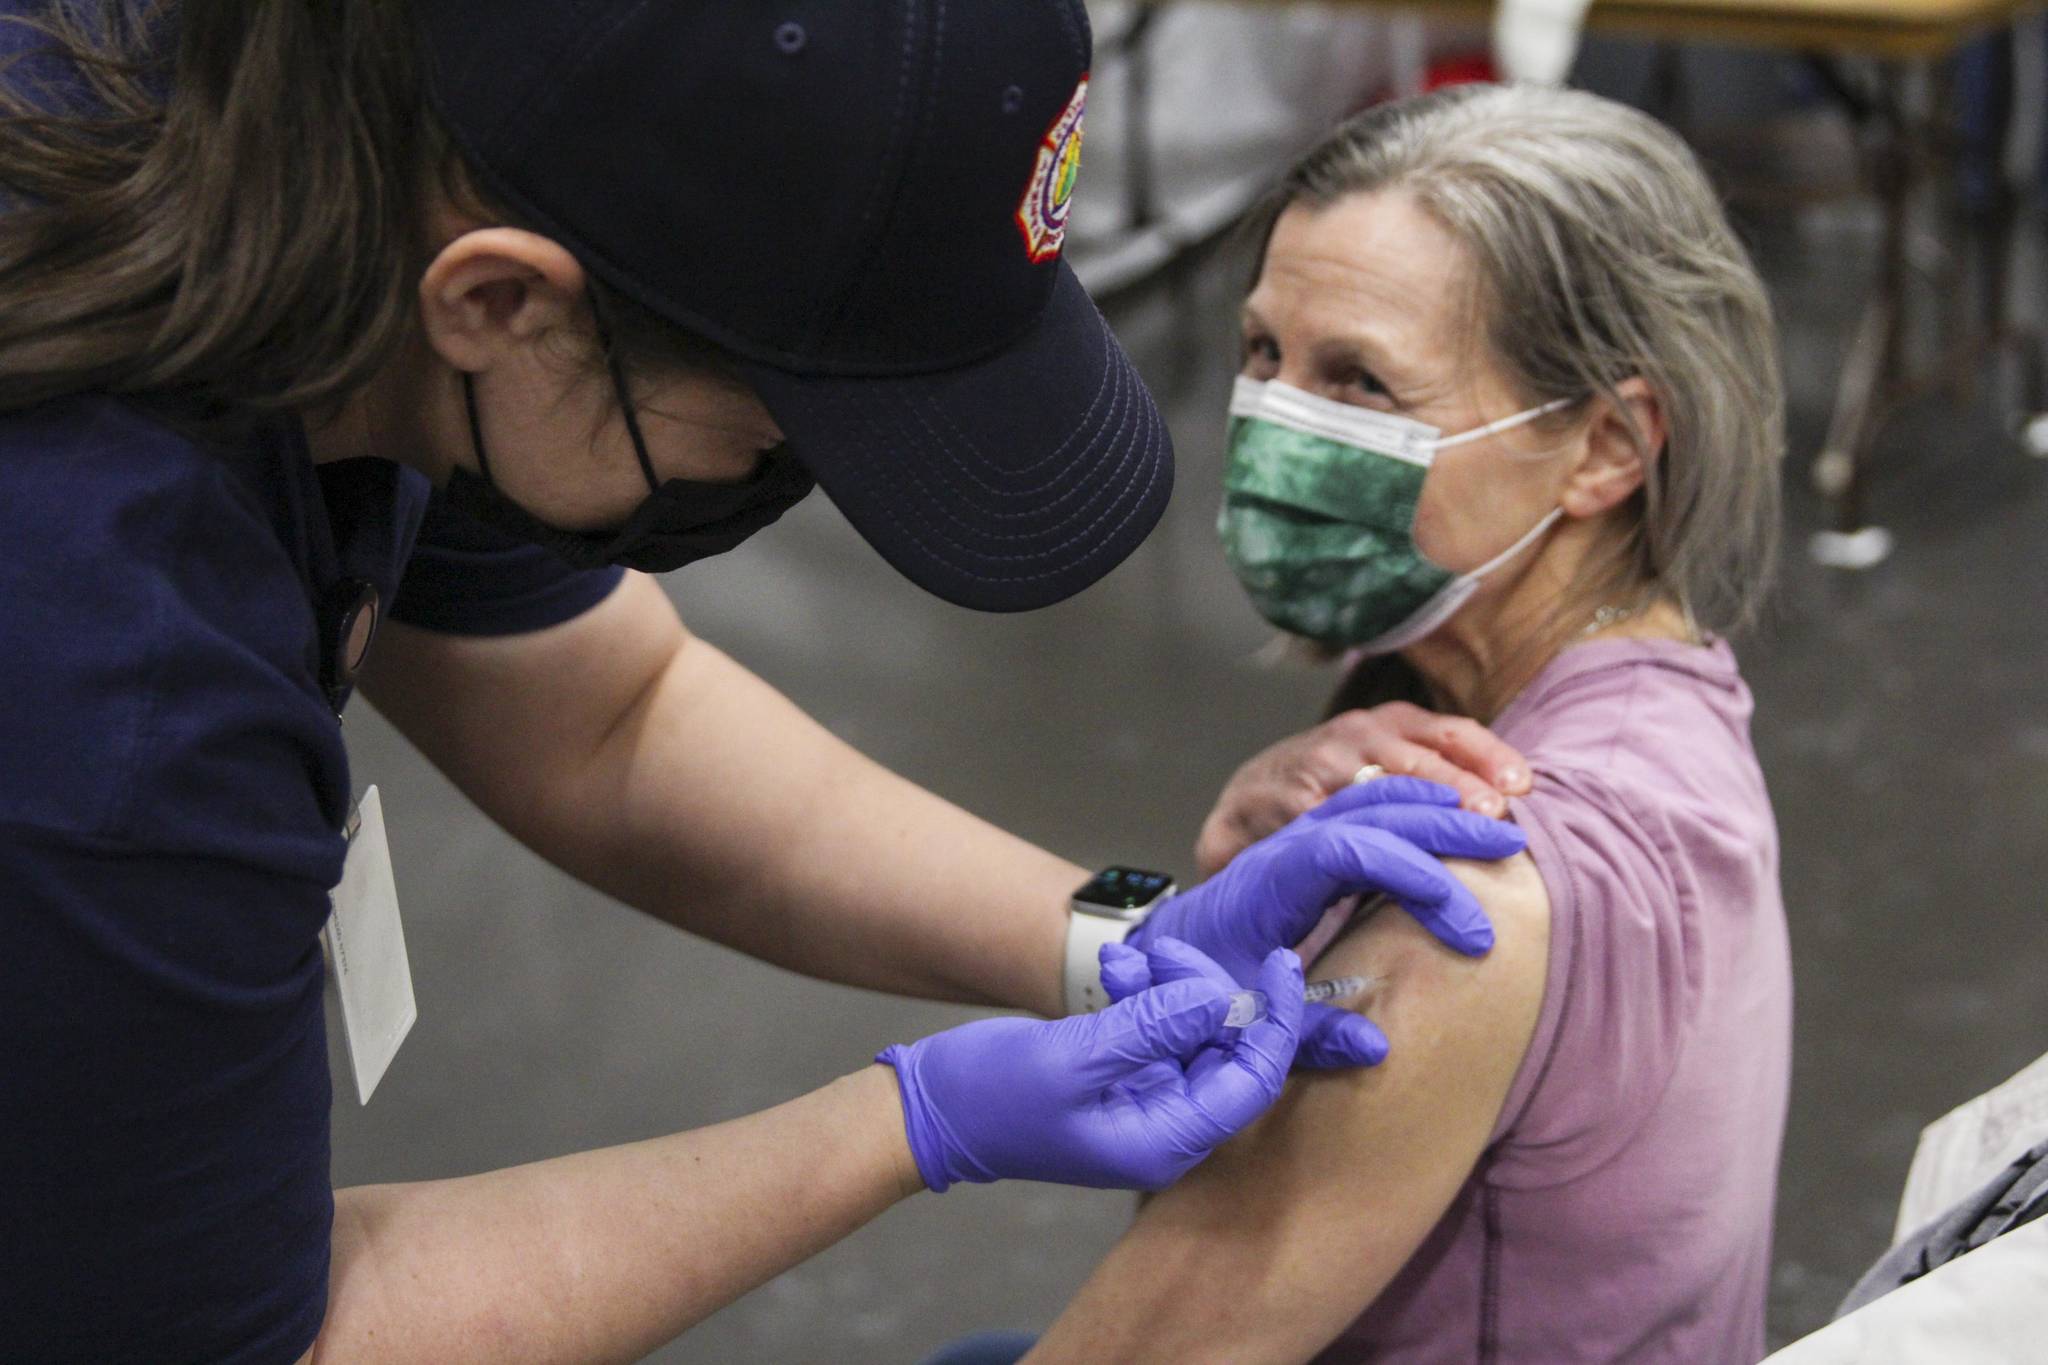 Wendy Wallers administers the coronavirus vaccine to Christina MacDougall during a clinic at Centennial Hall on Feb. 11, 2021. The City and Borough of Juneau lowered the risk level for the coronavirus to Level 1 on Feb. 17, the lowest since the system was put in place. (Michael S. Lockett / Juneau Empire)